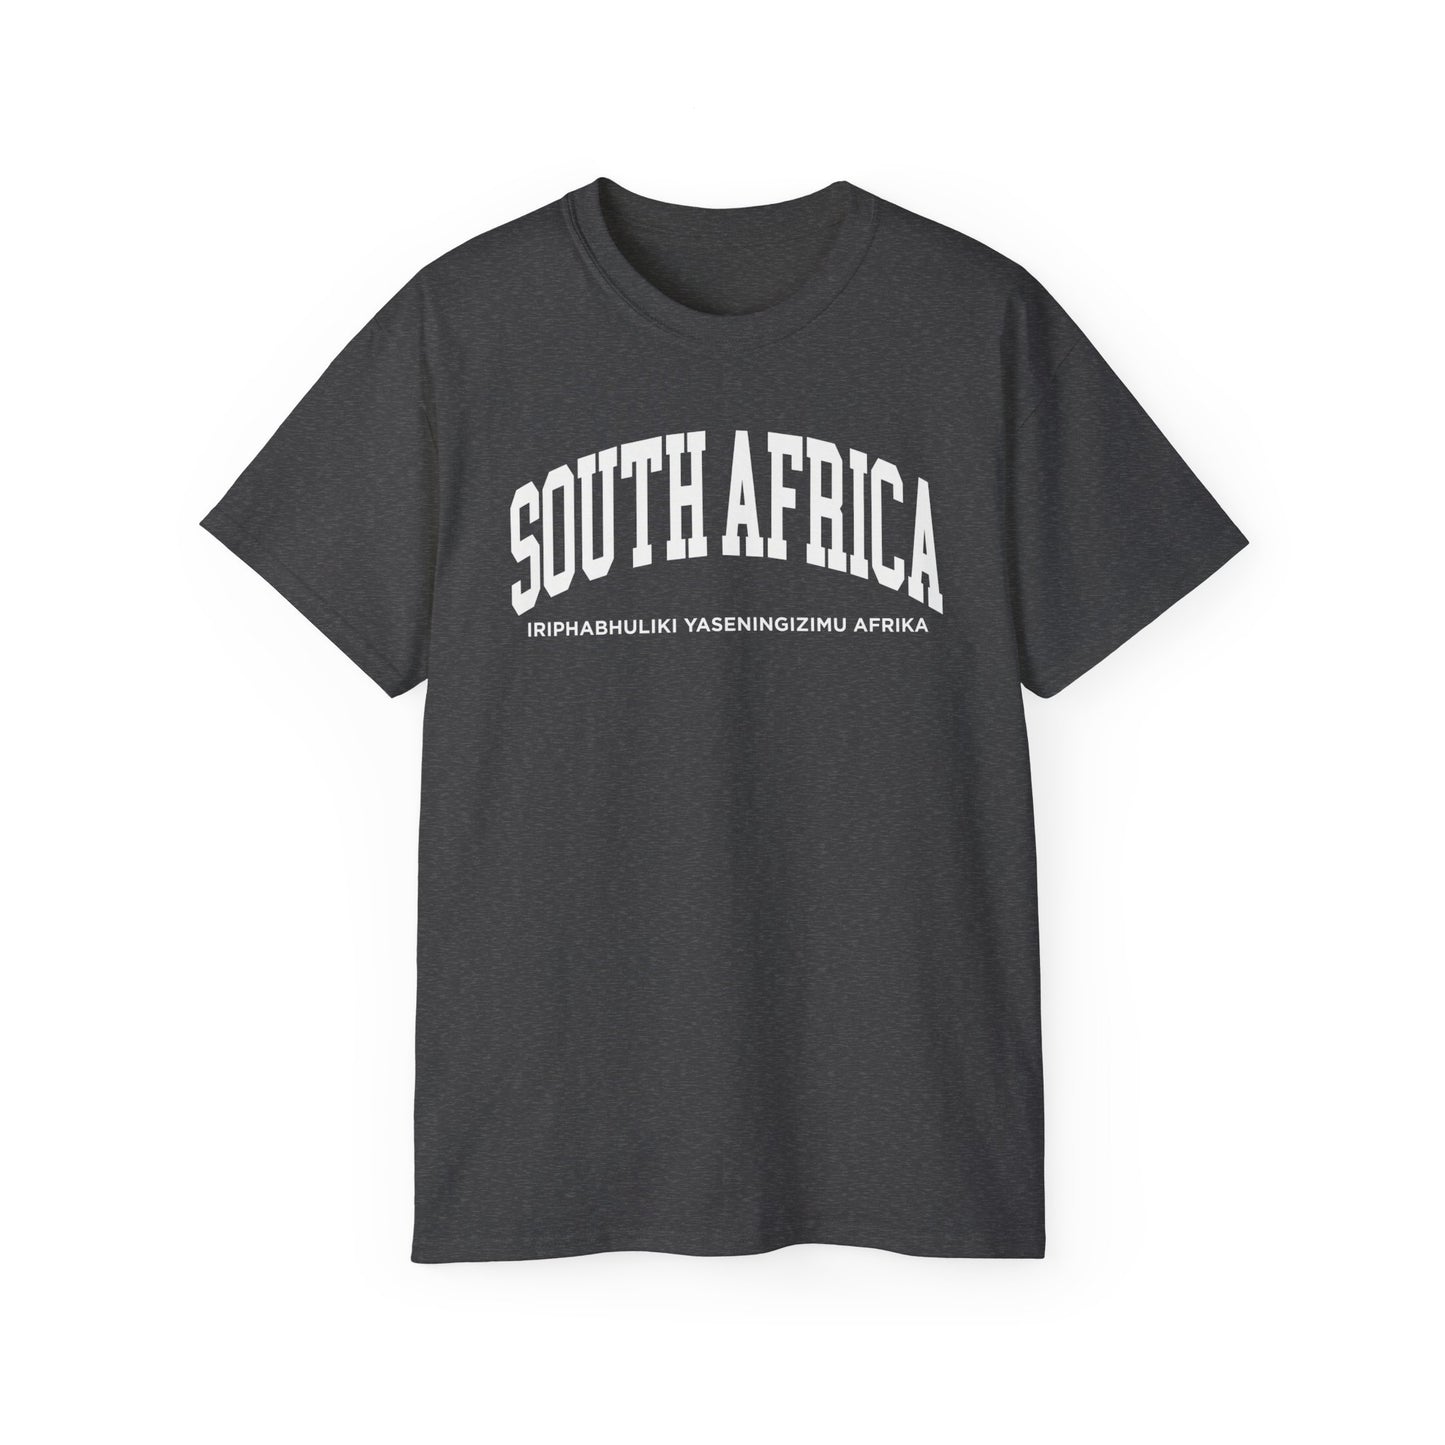 South Africa Tee